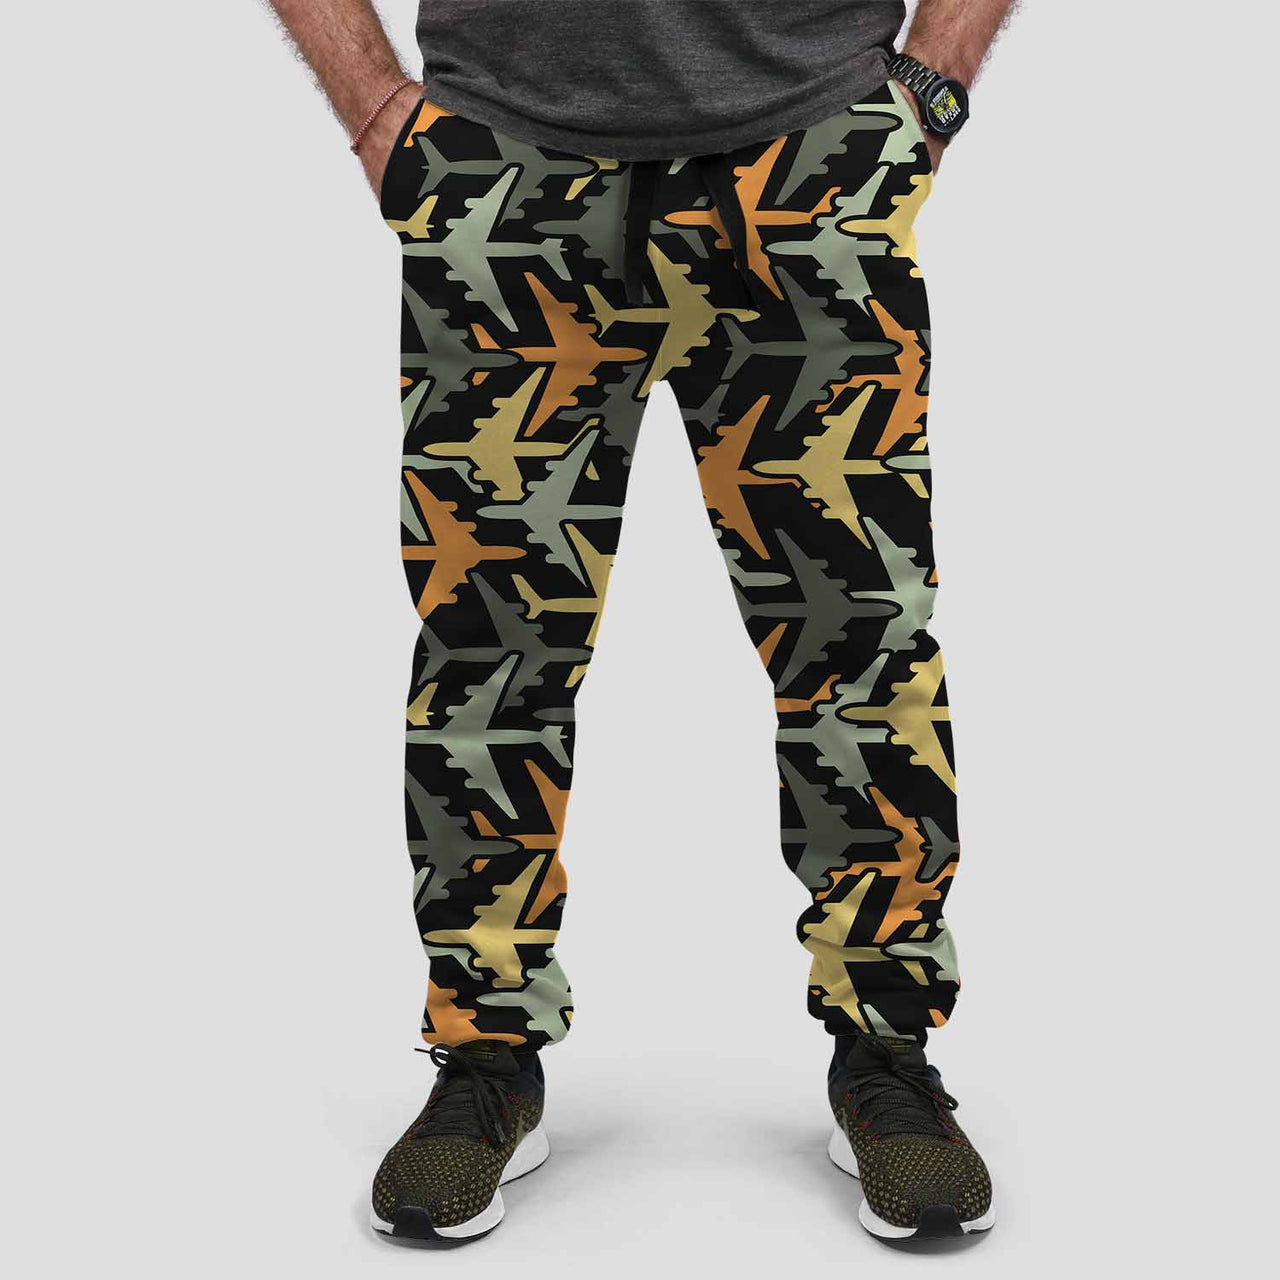 Volume 2 Super Colourful Airplanes Designed Sweat Pants & Trousers